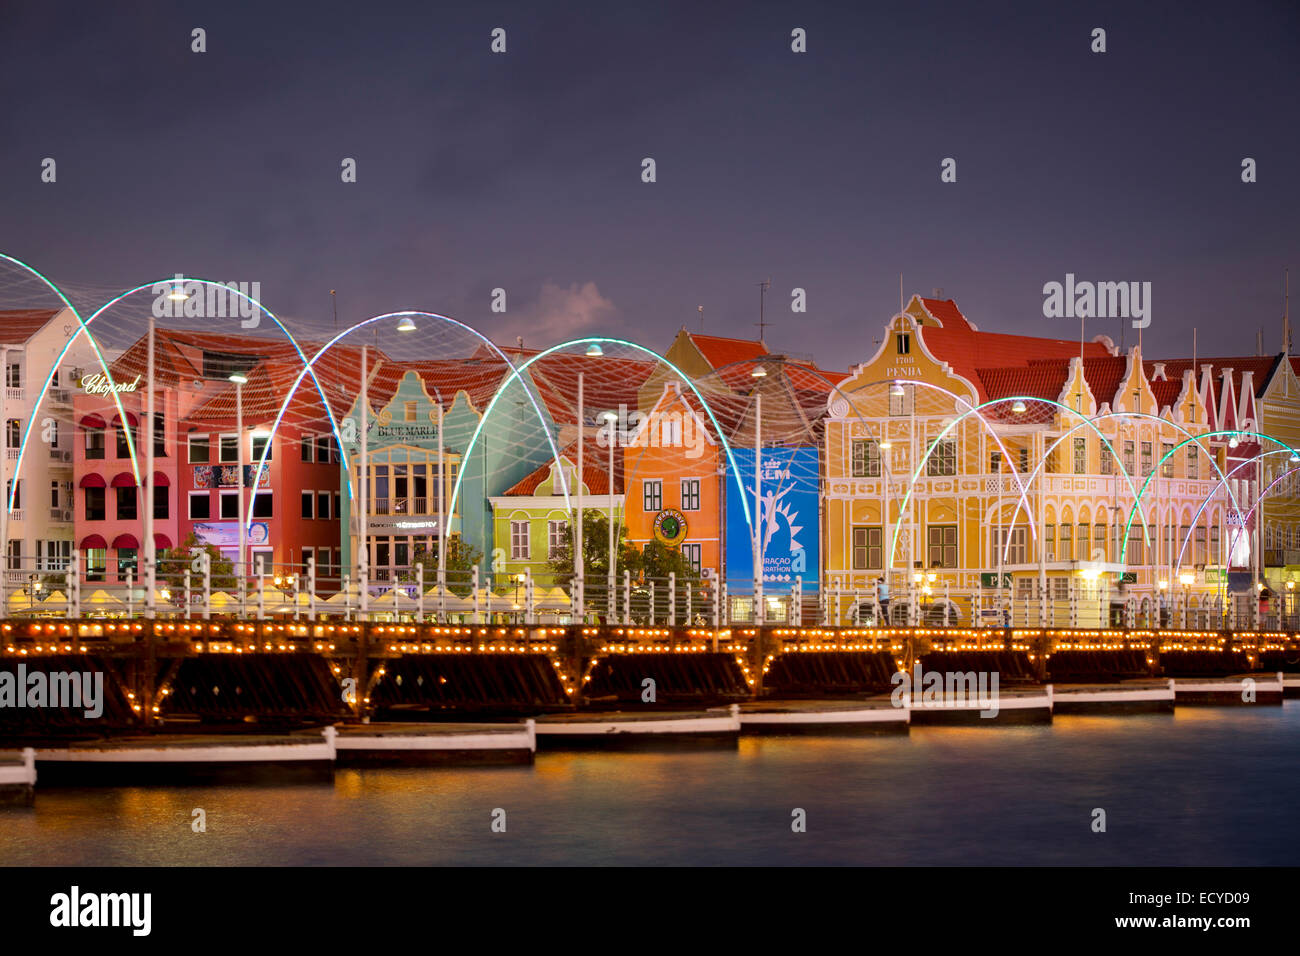 Colorata architettura olandese linee il wharf a Willemstad, Curacao, Antille Foto Stock